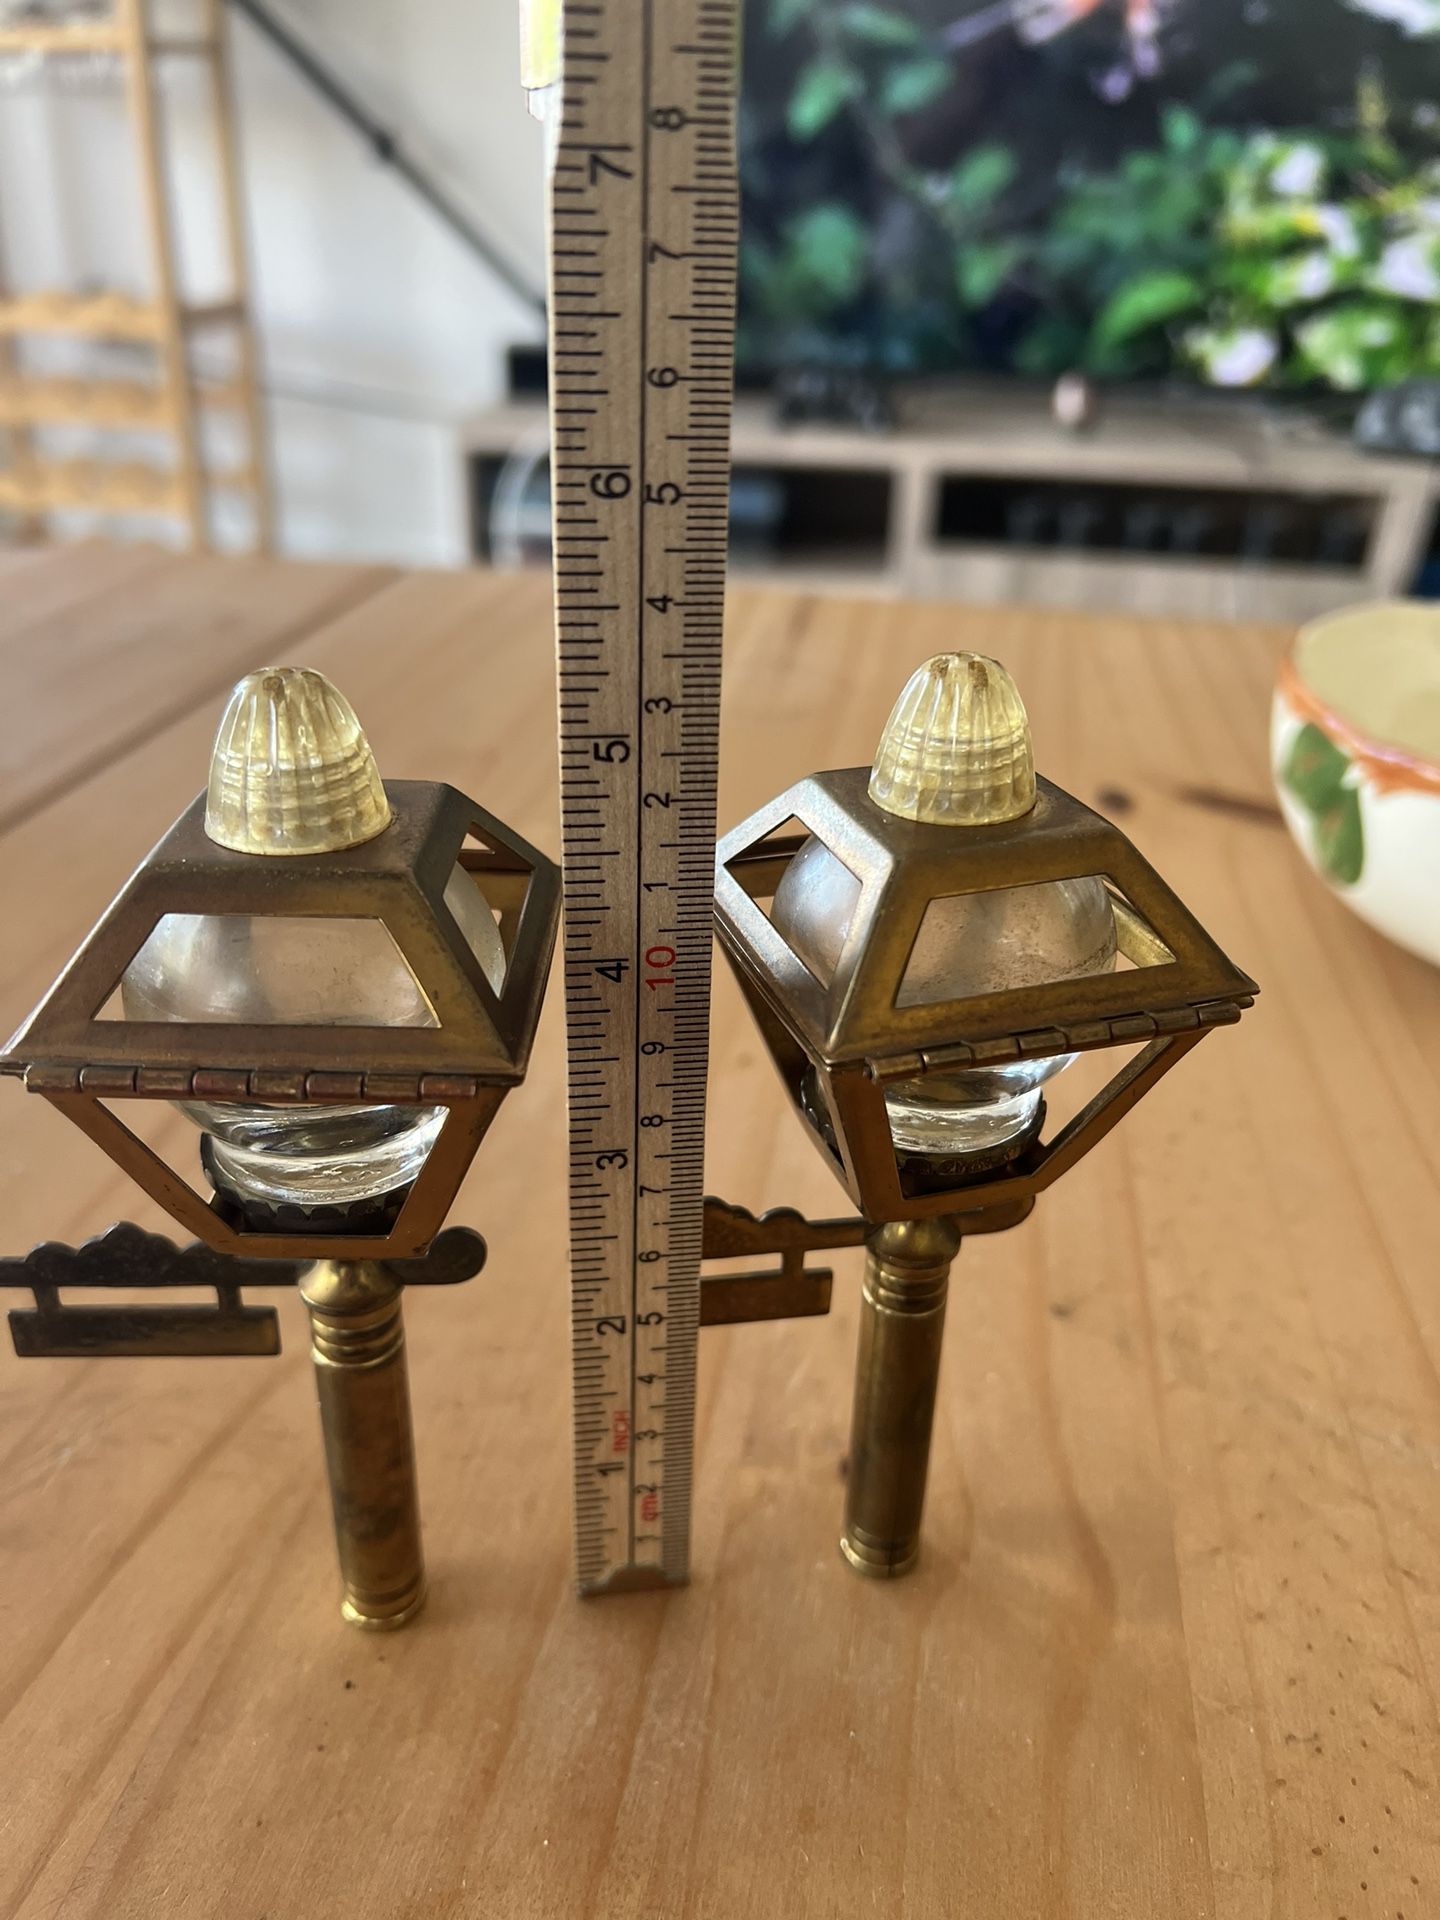 VTG BRASS AND GLASS STREET LIGHT LAMP POST SALT AND PEPPER SHAKER SET LID  OPENS. Missing the stands but they do still stand up. They have some tarnis  for Sale in Halndle